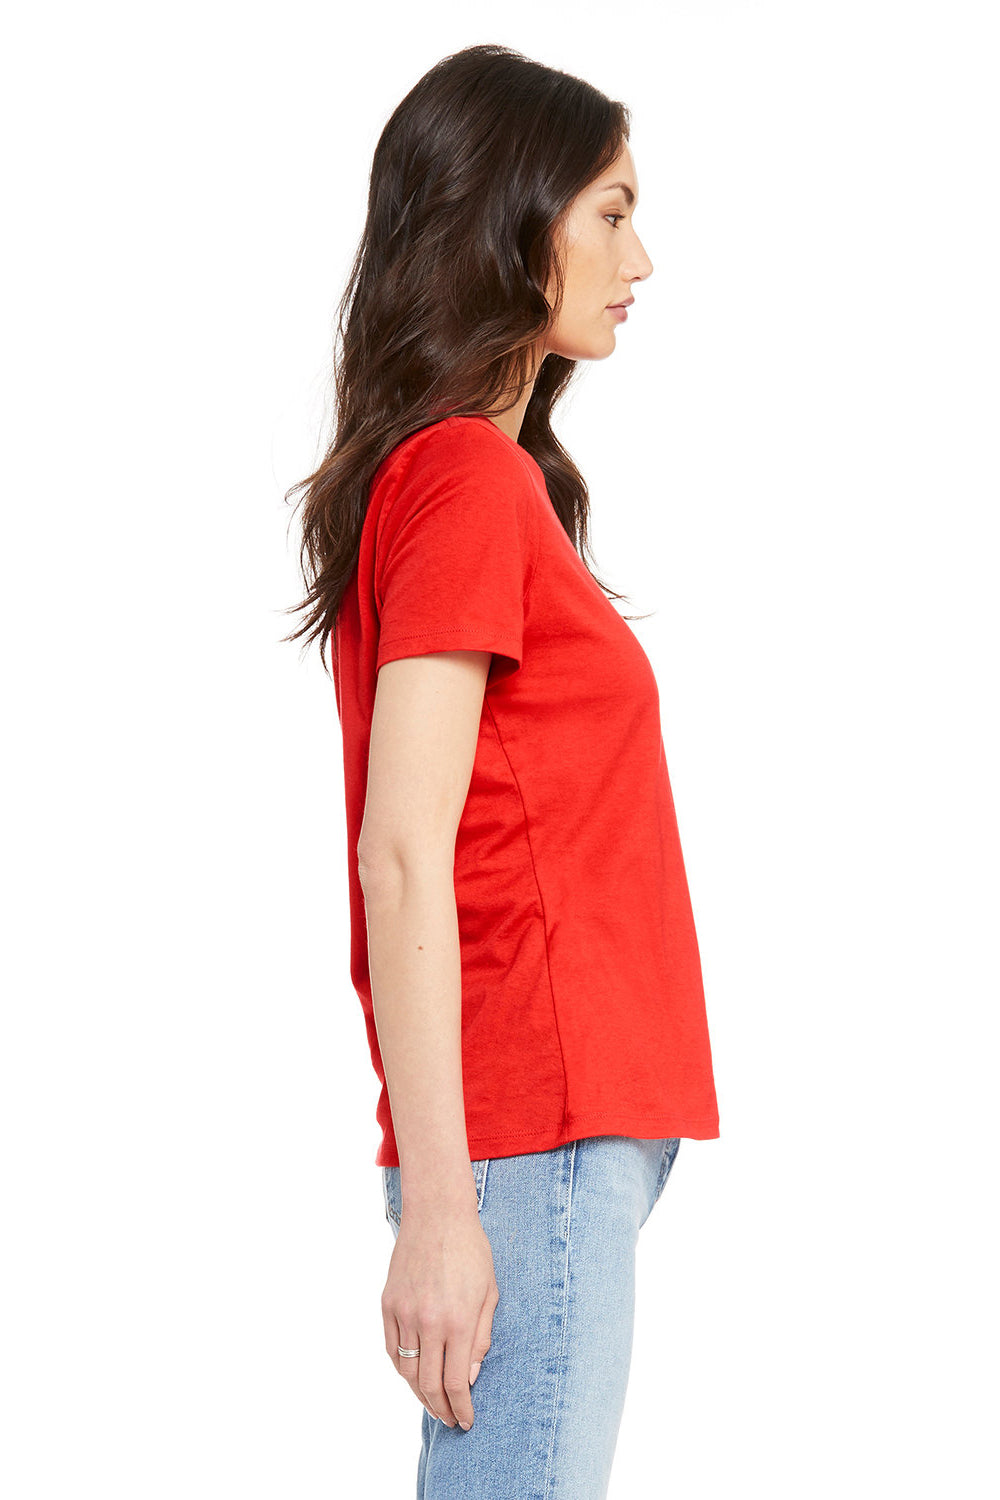 Bella + Canvas BC6400/B6400/6400 Womens Relaxed Jersey Short Sleeve Crewneck T-Shirt Poppy Red Model Side